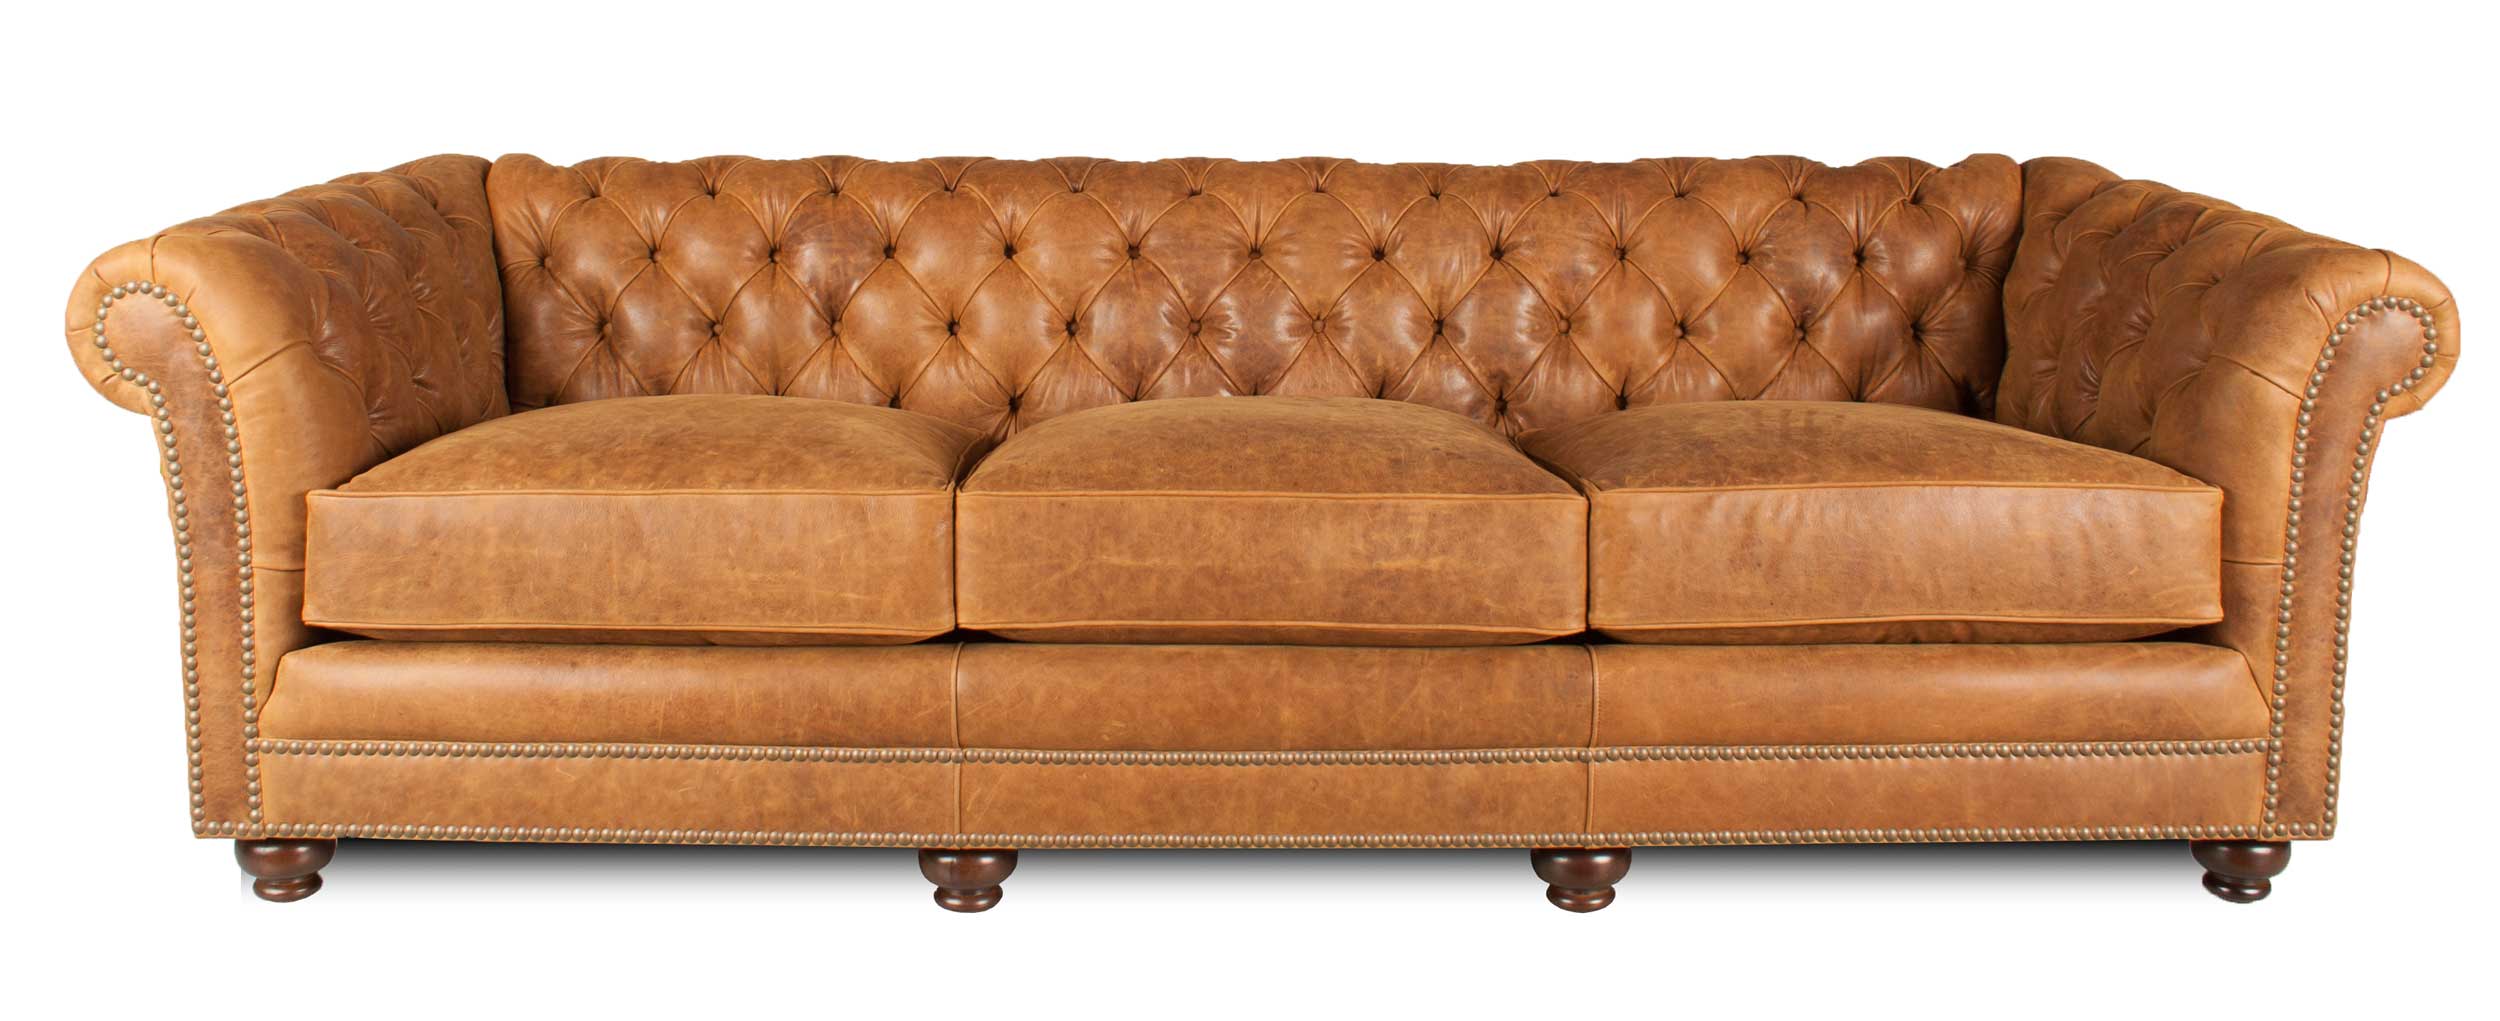 Deep Seated Sofas For The Big And Tall, Best Deep Seat Leather Sofa